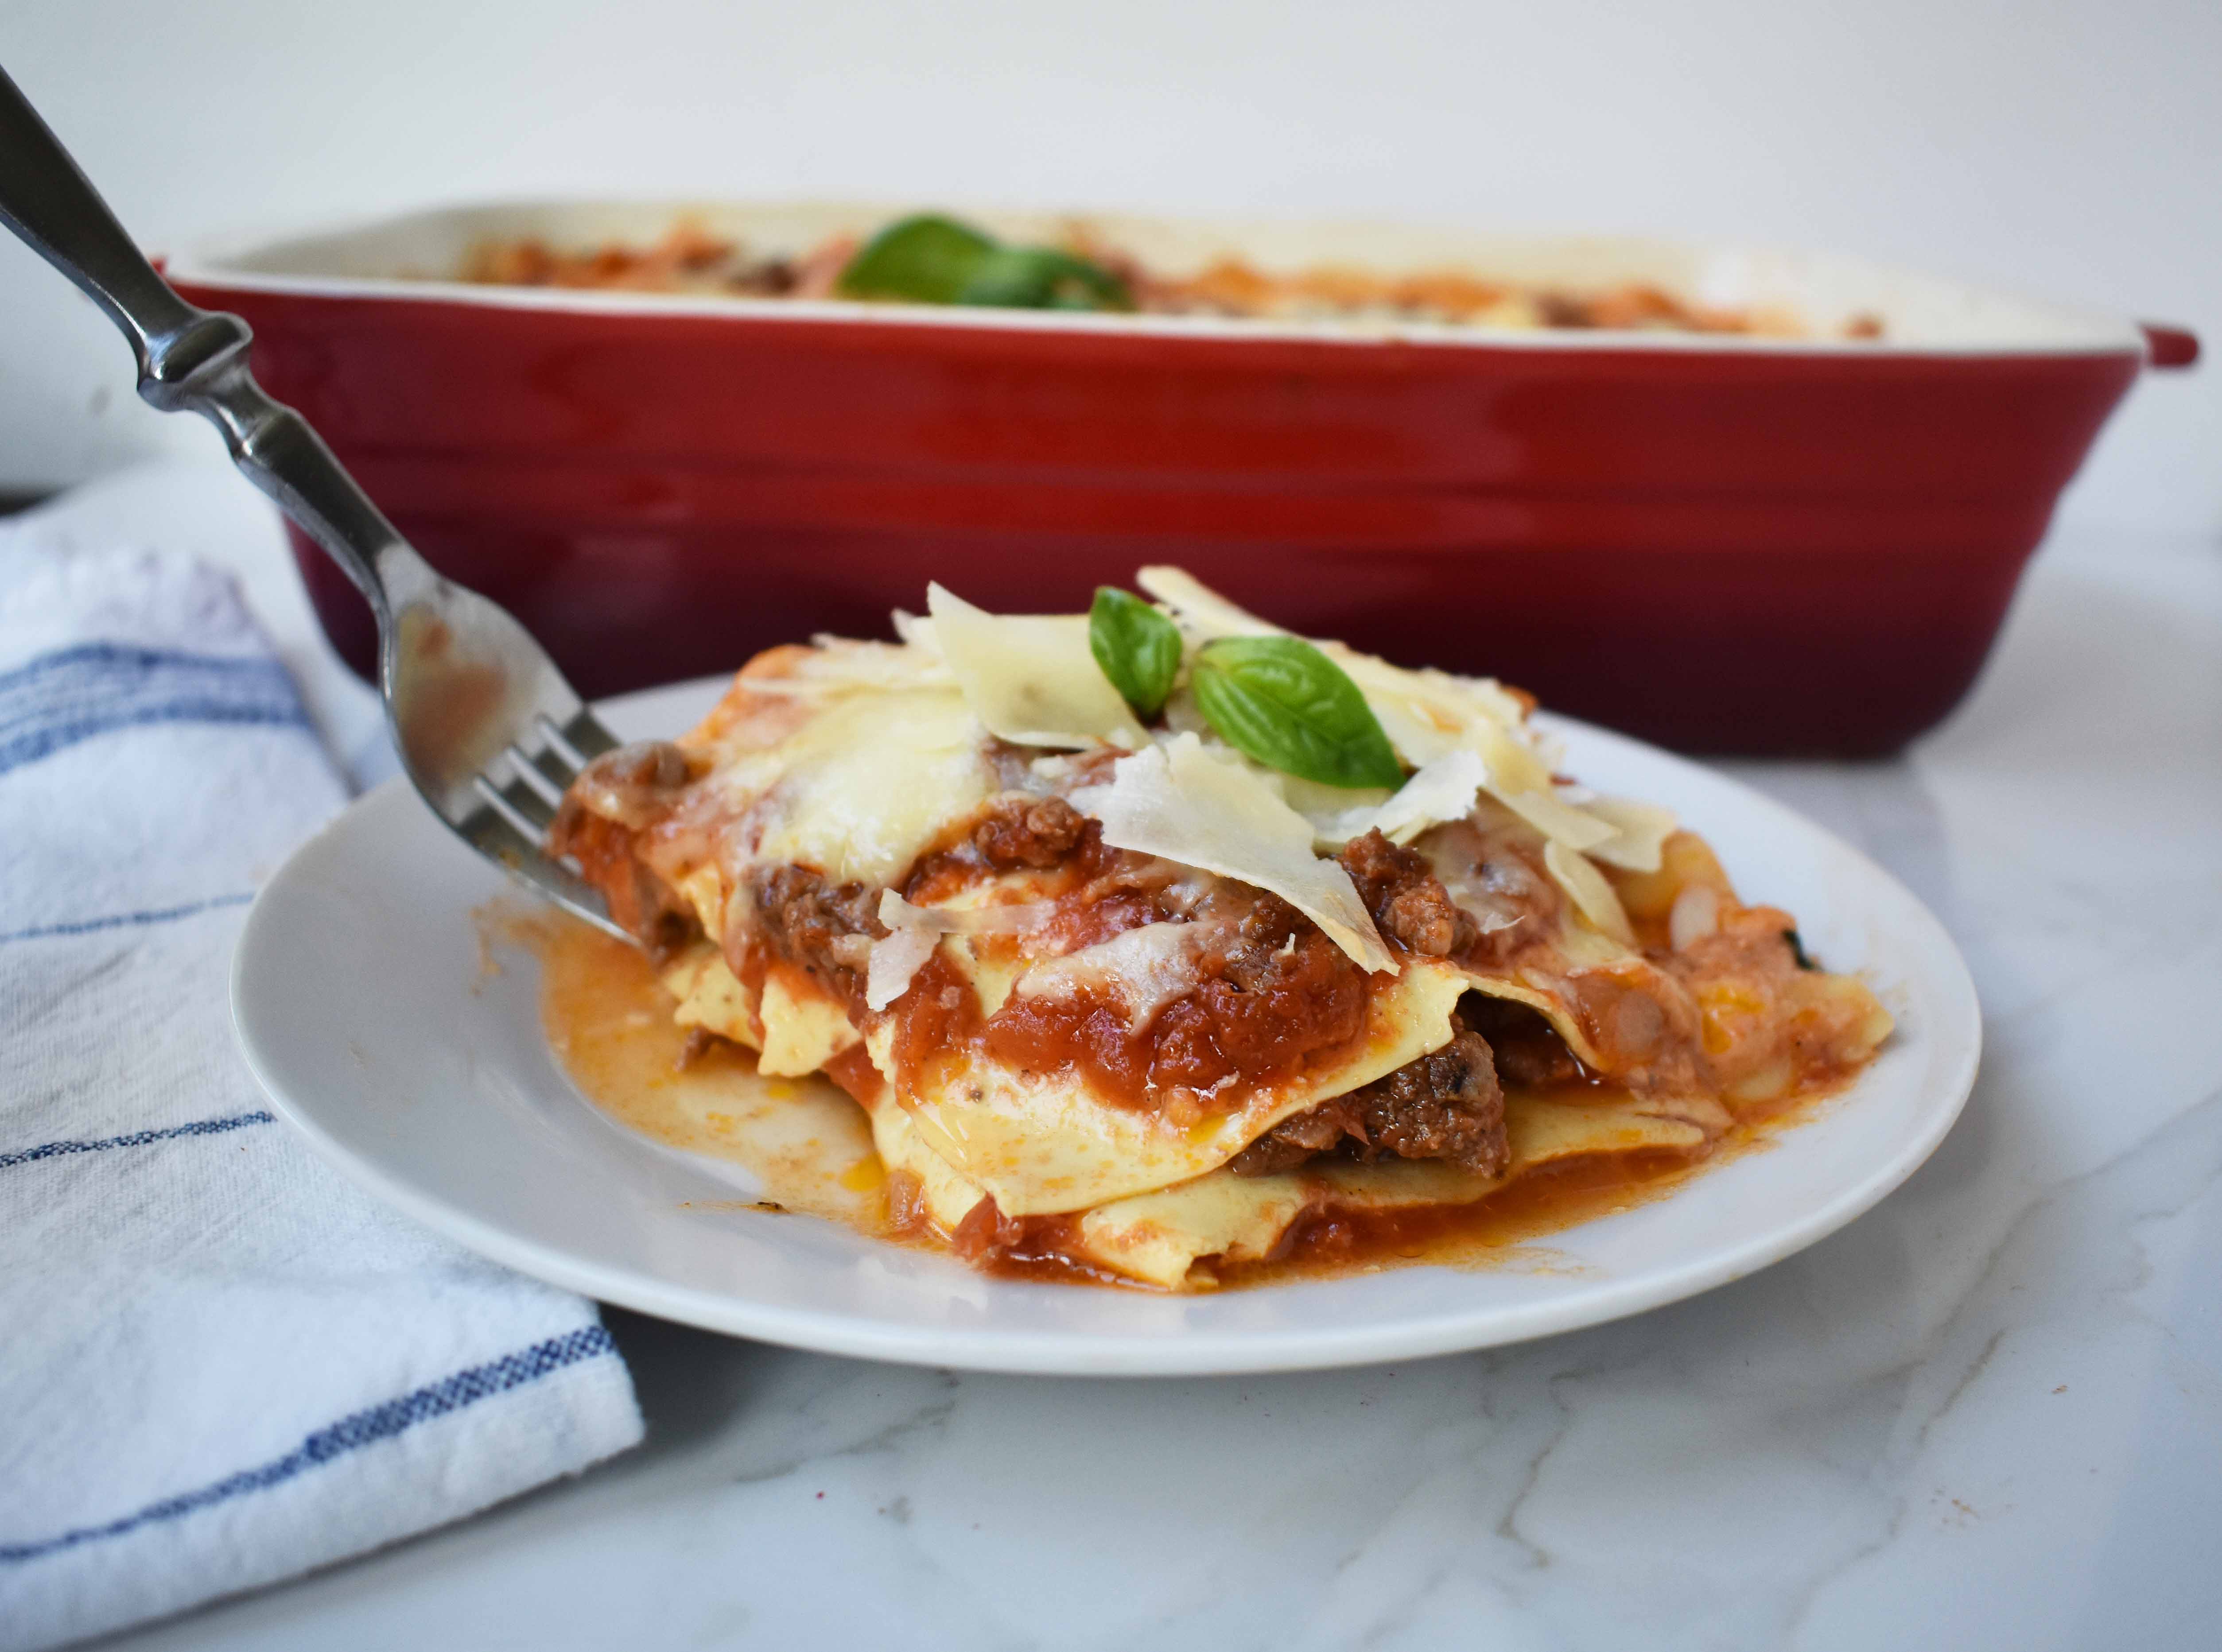 Italian Bolognese Lasagna. Authentic Italian recipe made with a traditional meat sauce, a creamy bechamel sauce, parmesan and mozzarella cheeses. 